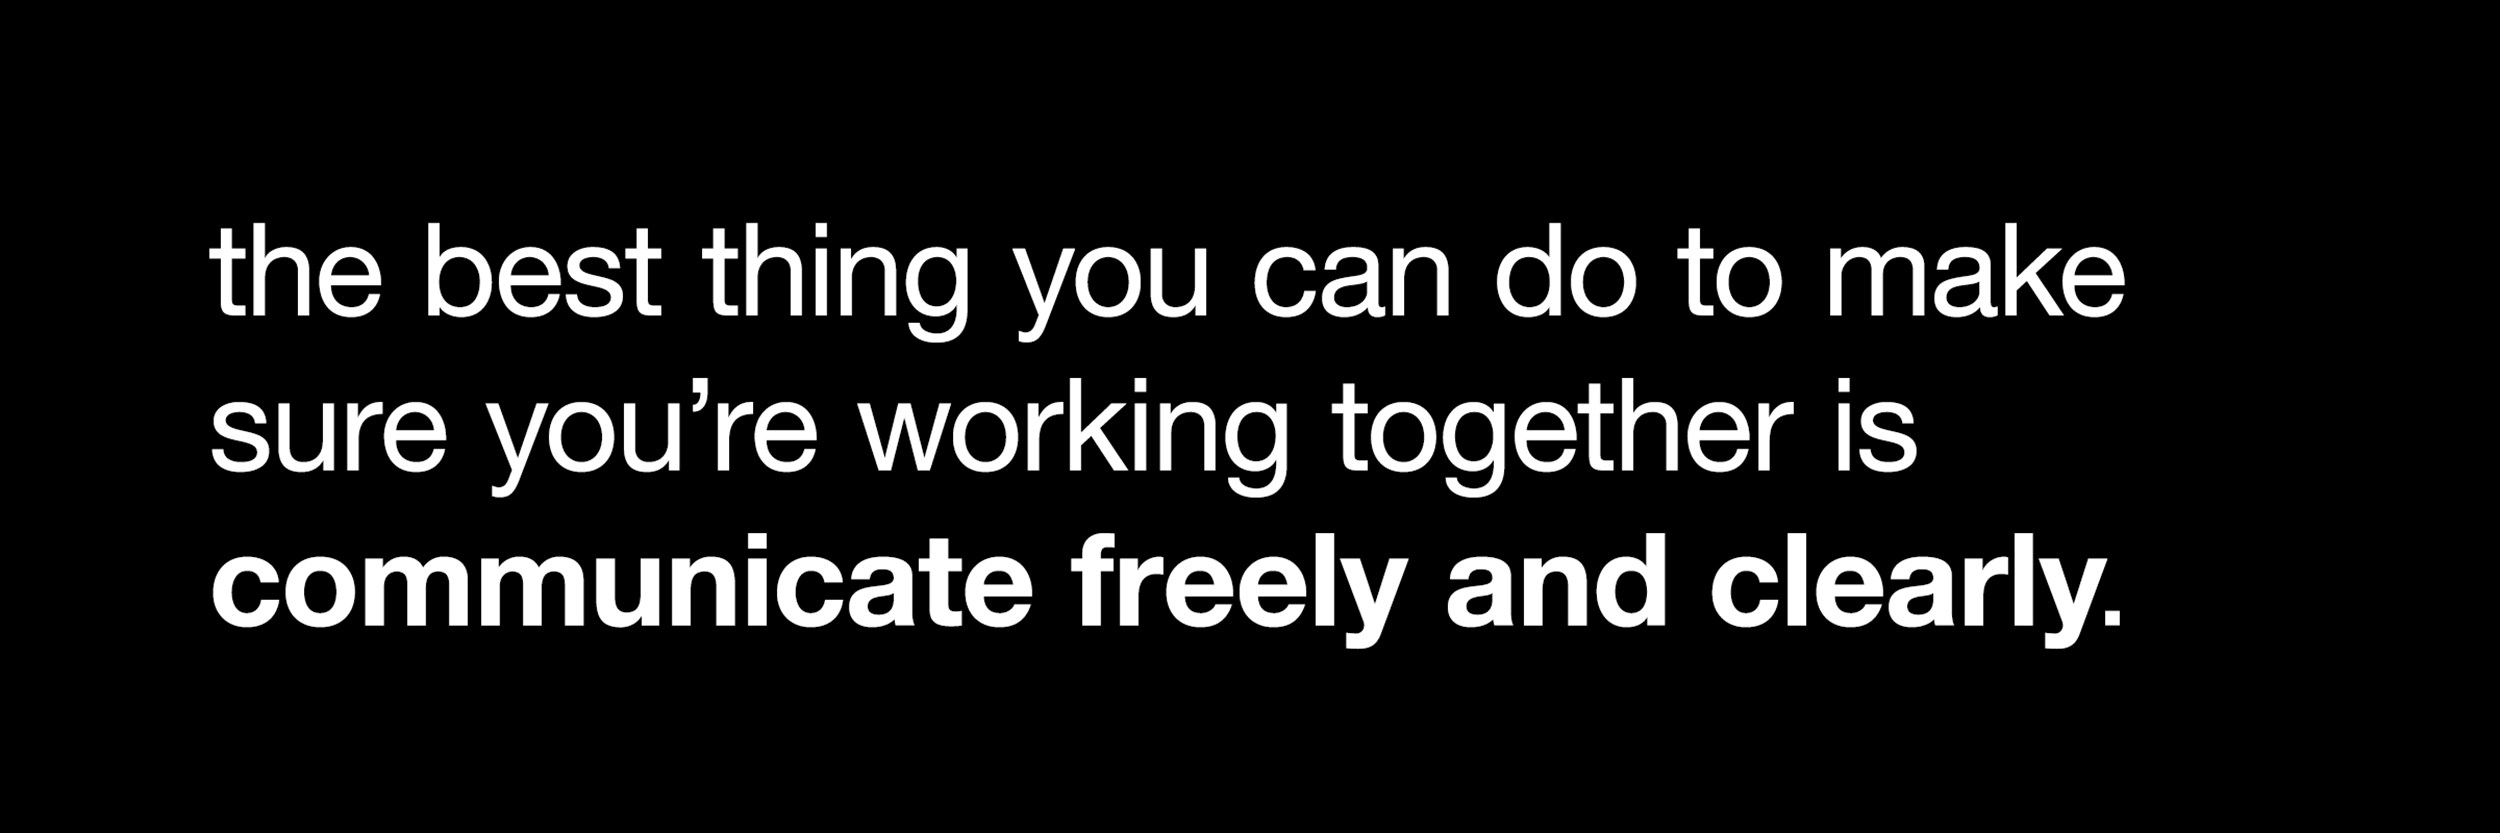 collaboration quote image